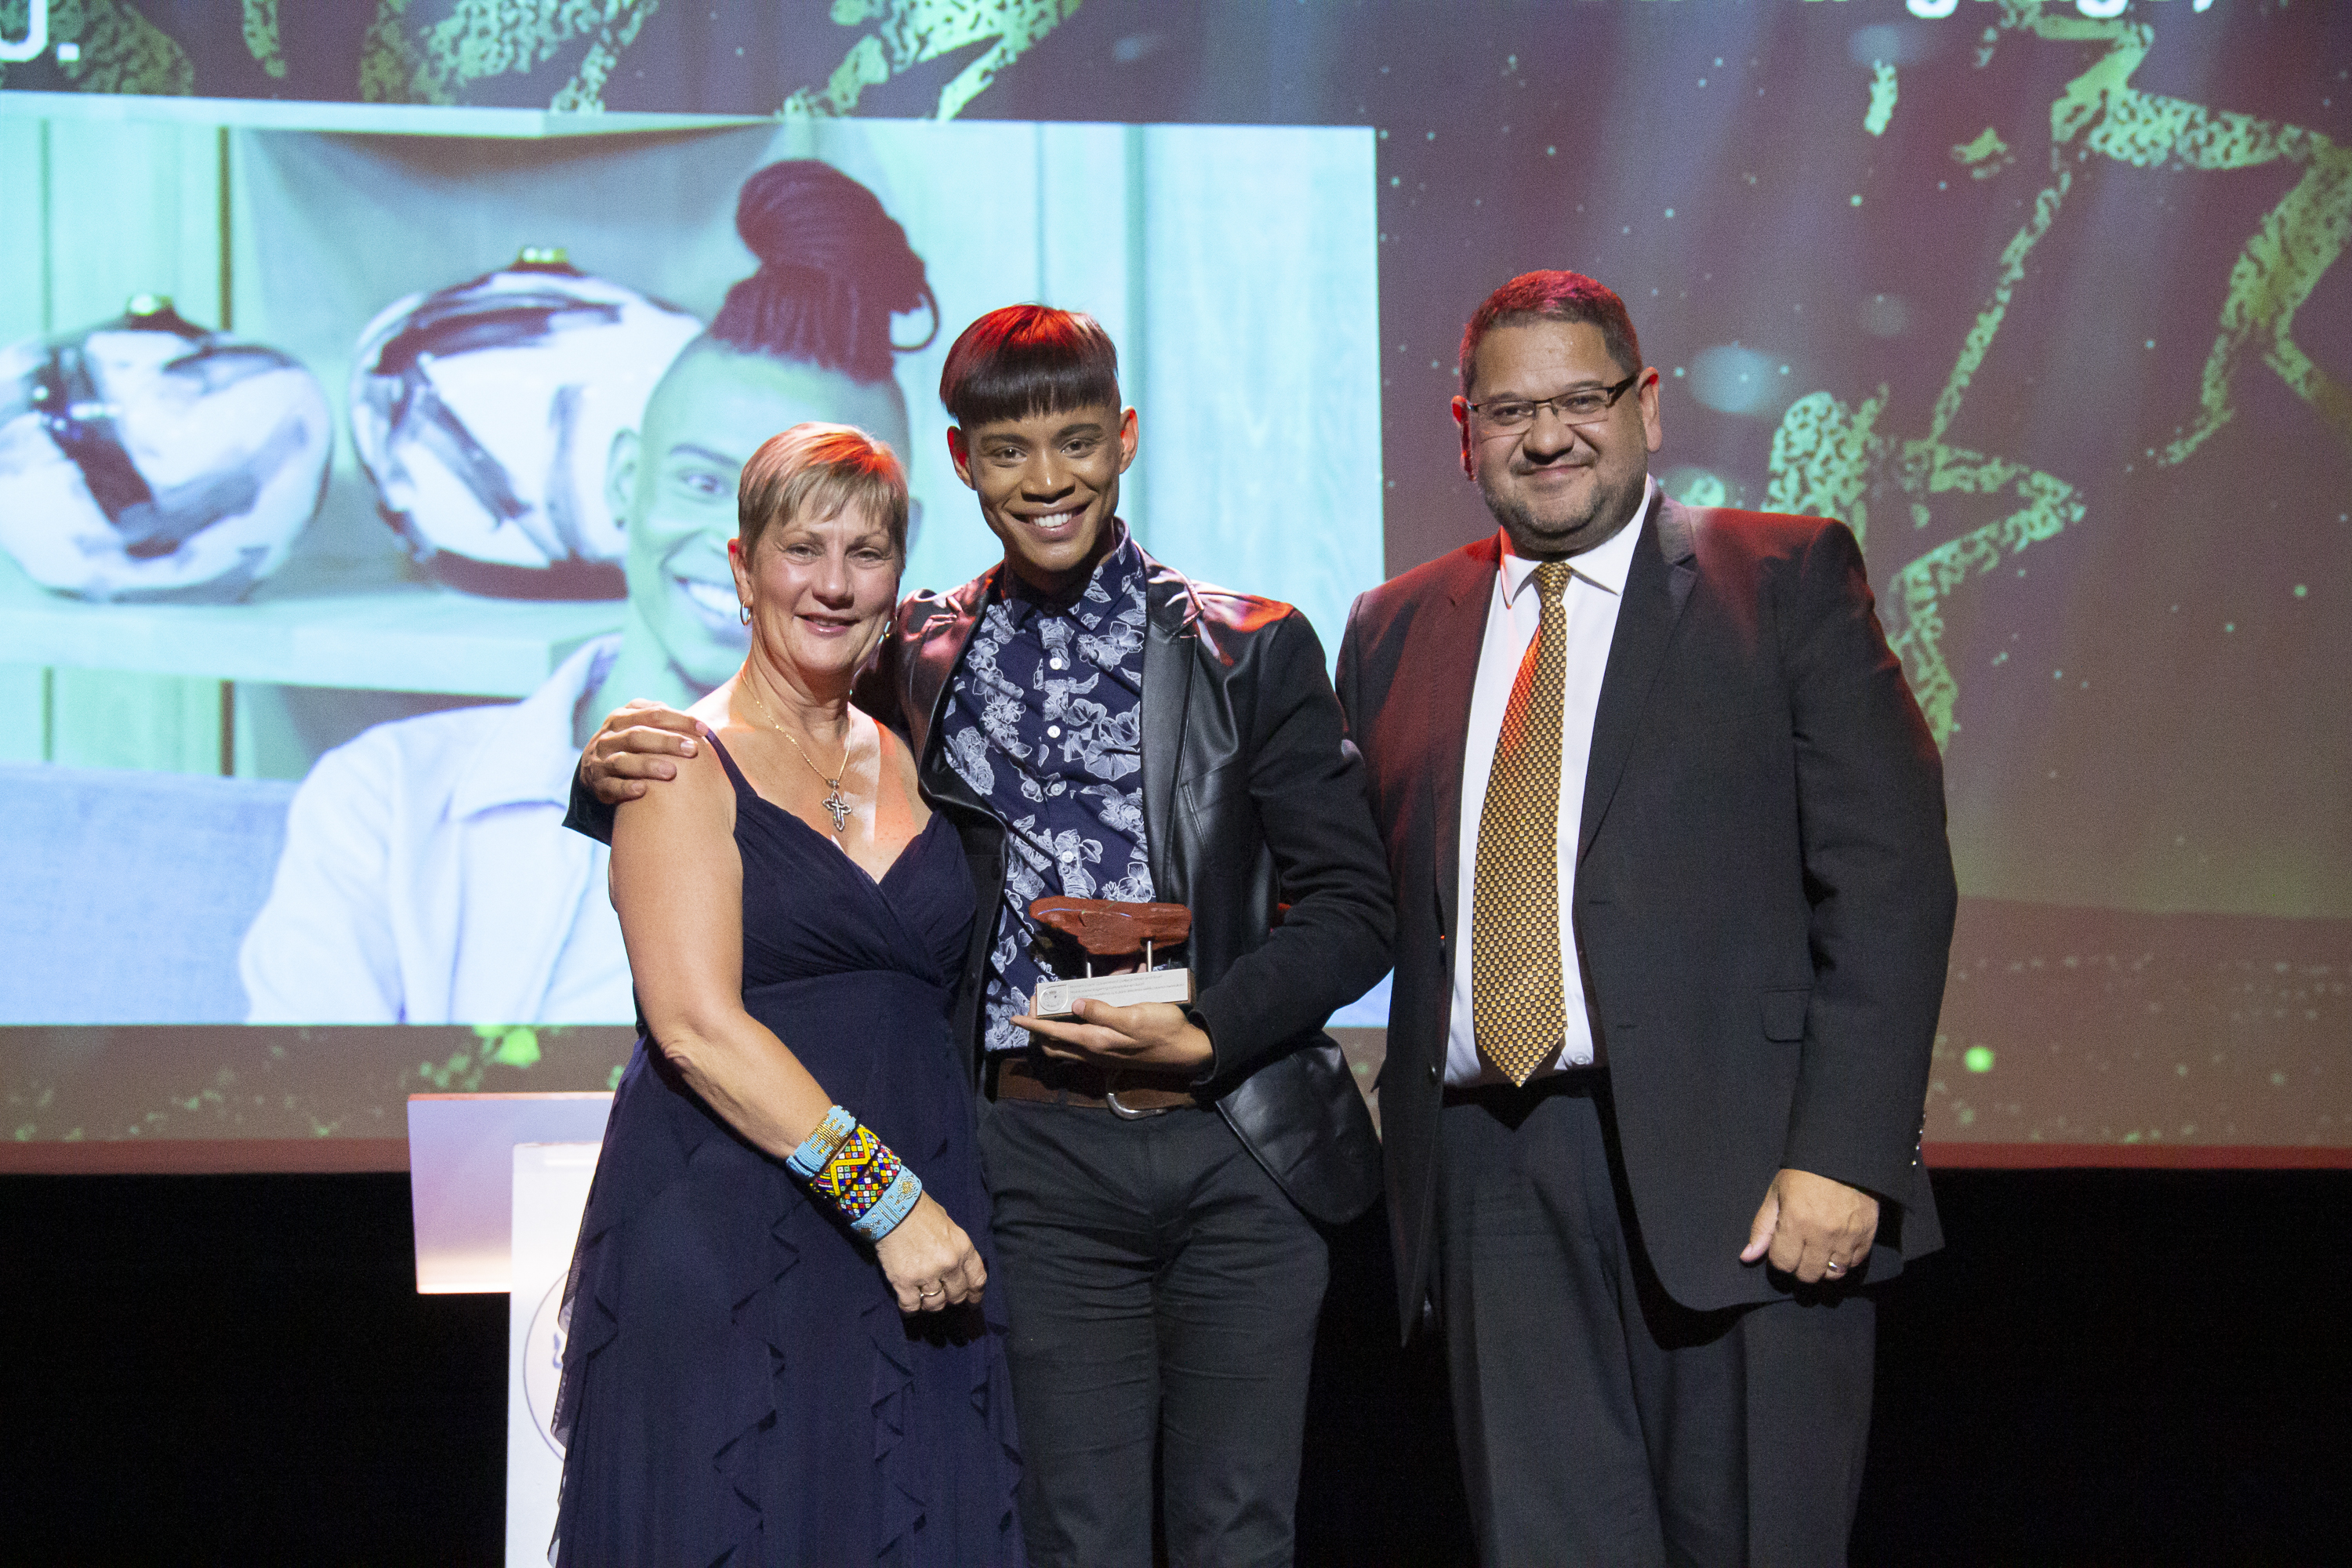 Kirvin Fortuin (centre) receives an award from minister Anroux Marais (left) and DCAS HOD, Brent Walters.